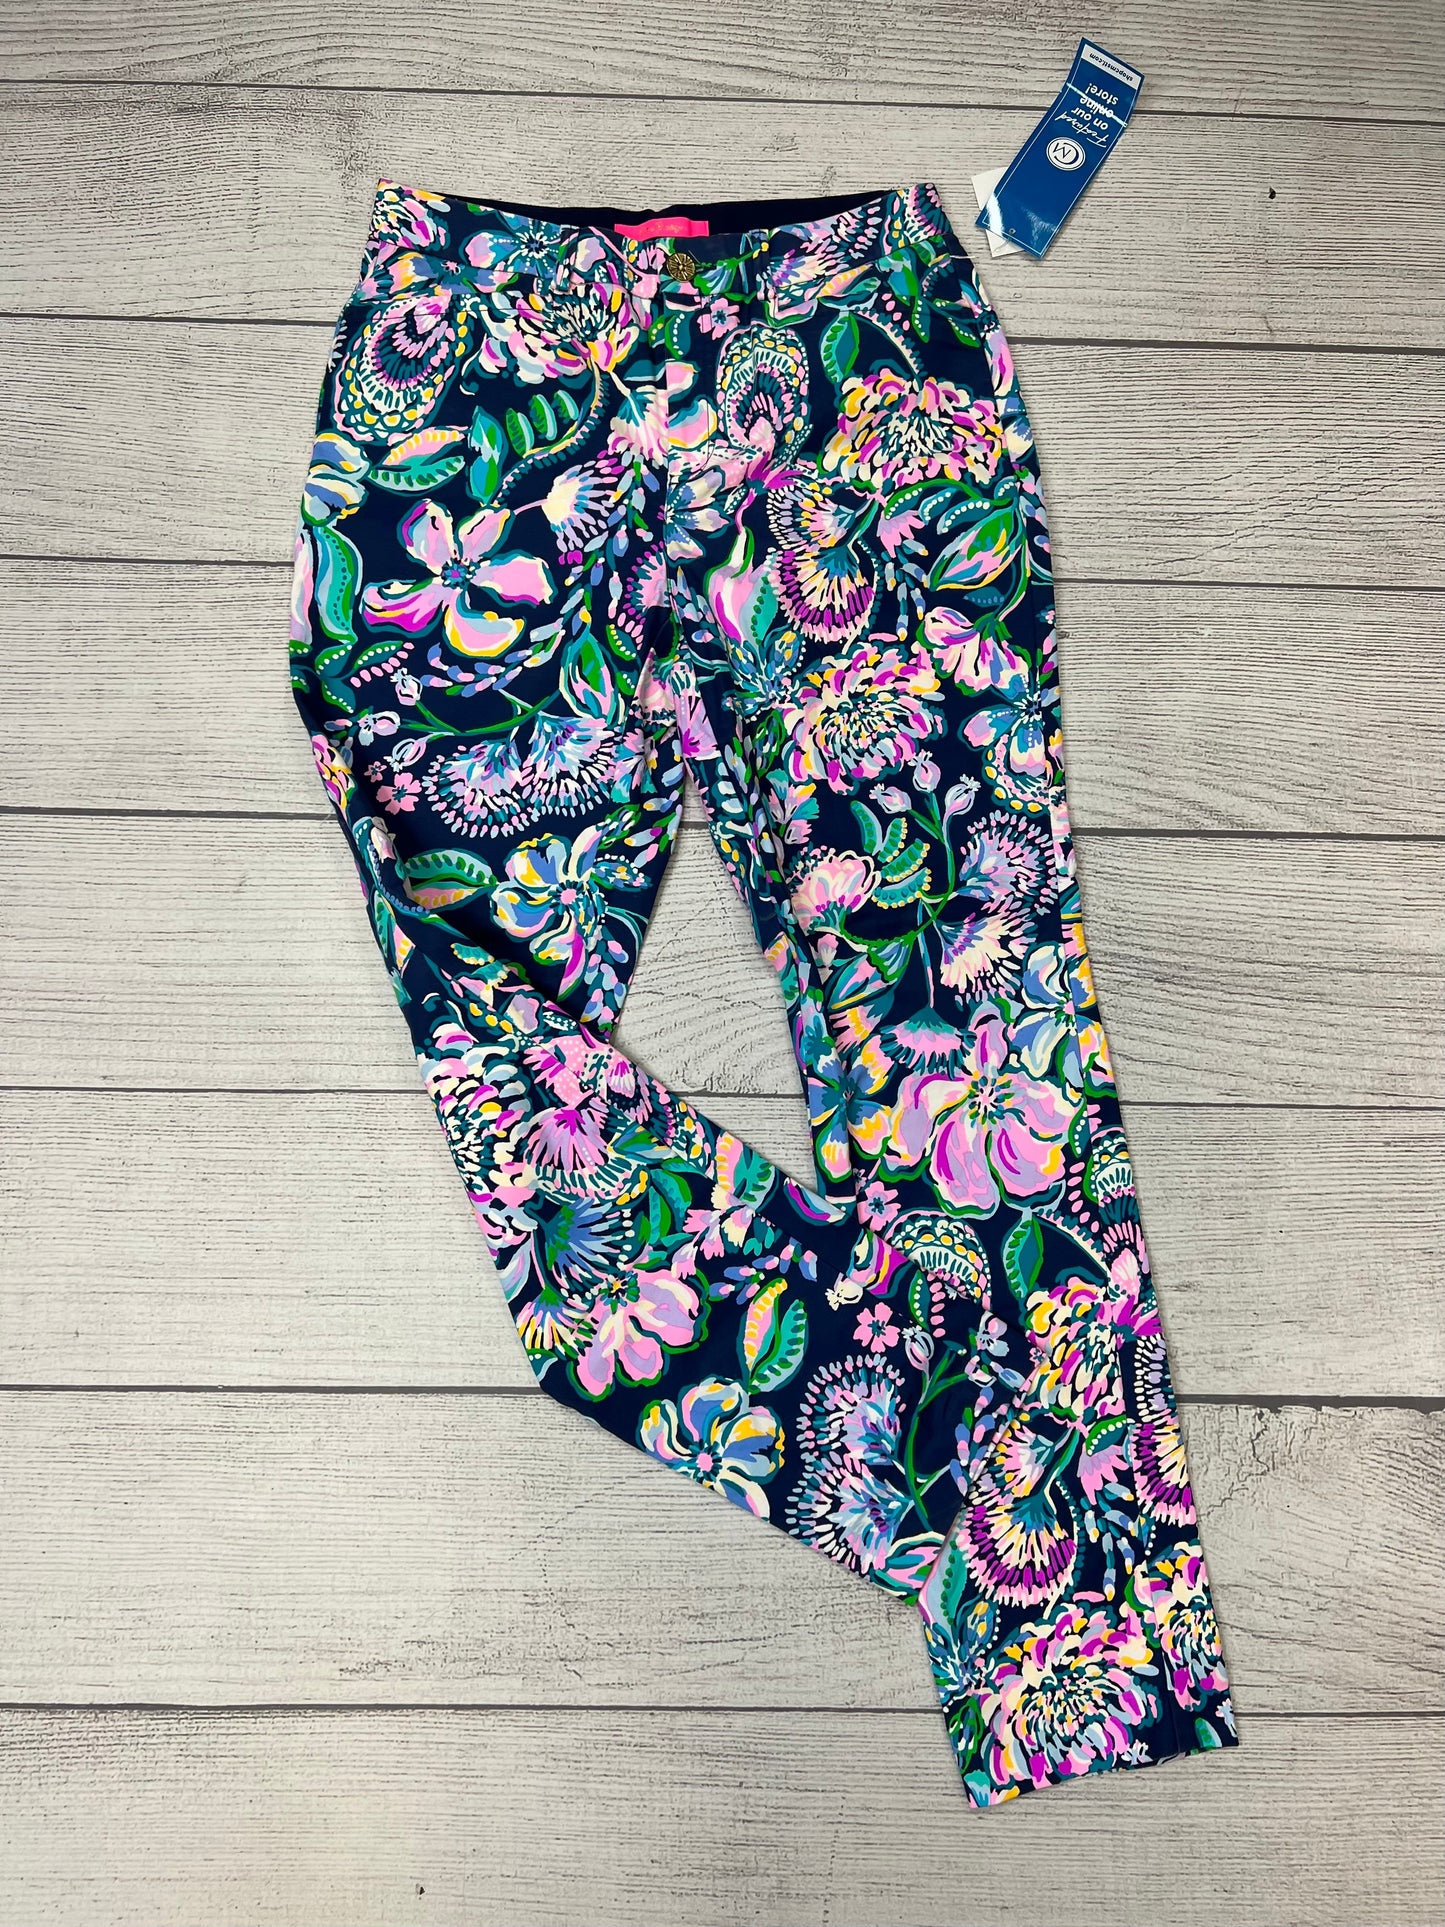 Multi-colored Pants Ankle Lilly Pulitzer, Size 8